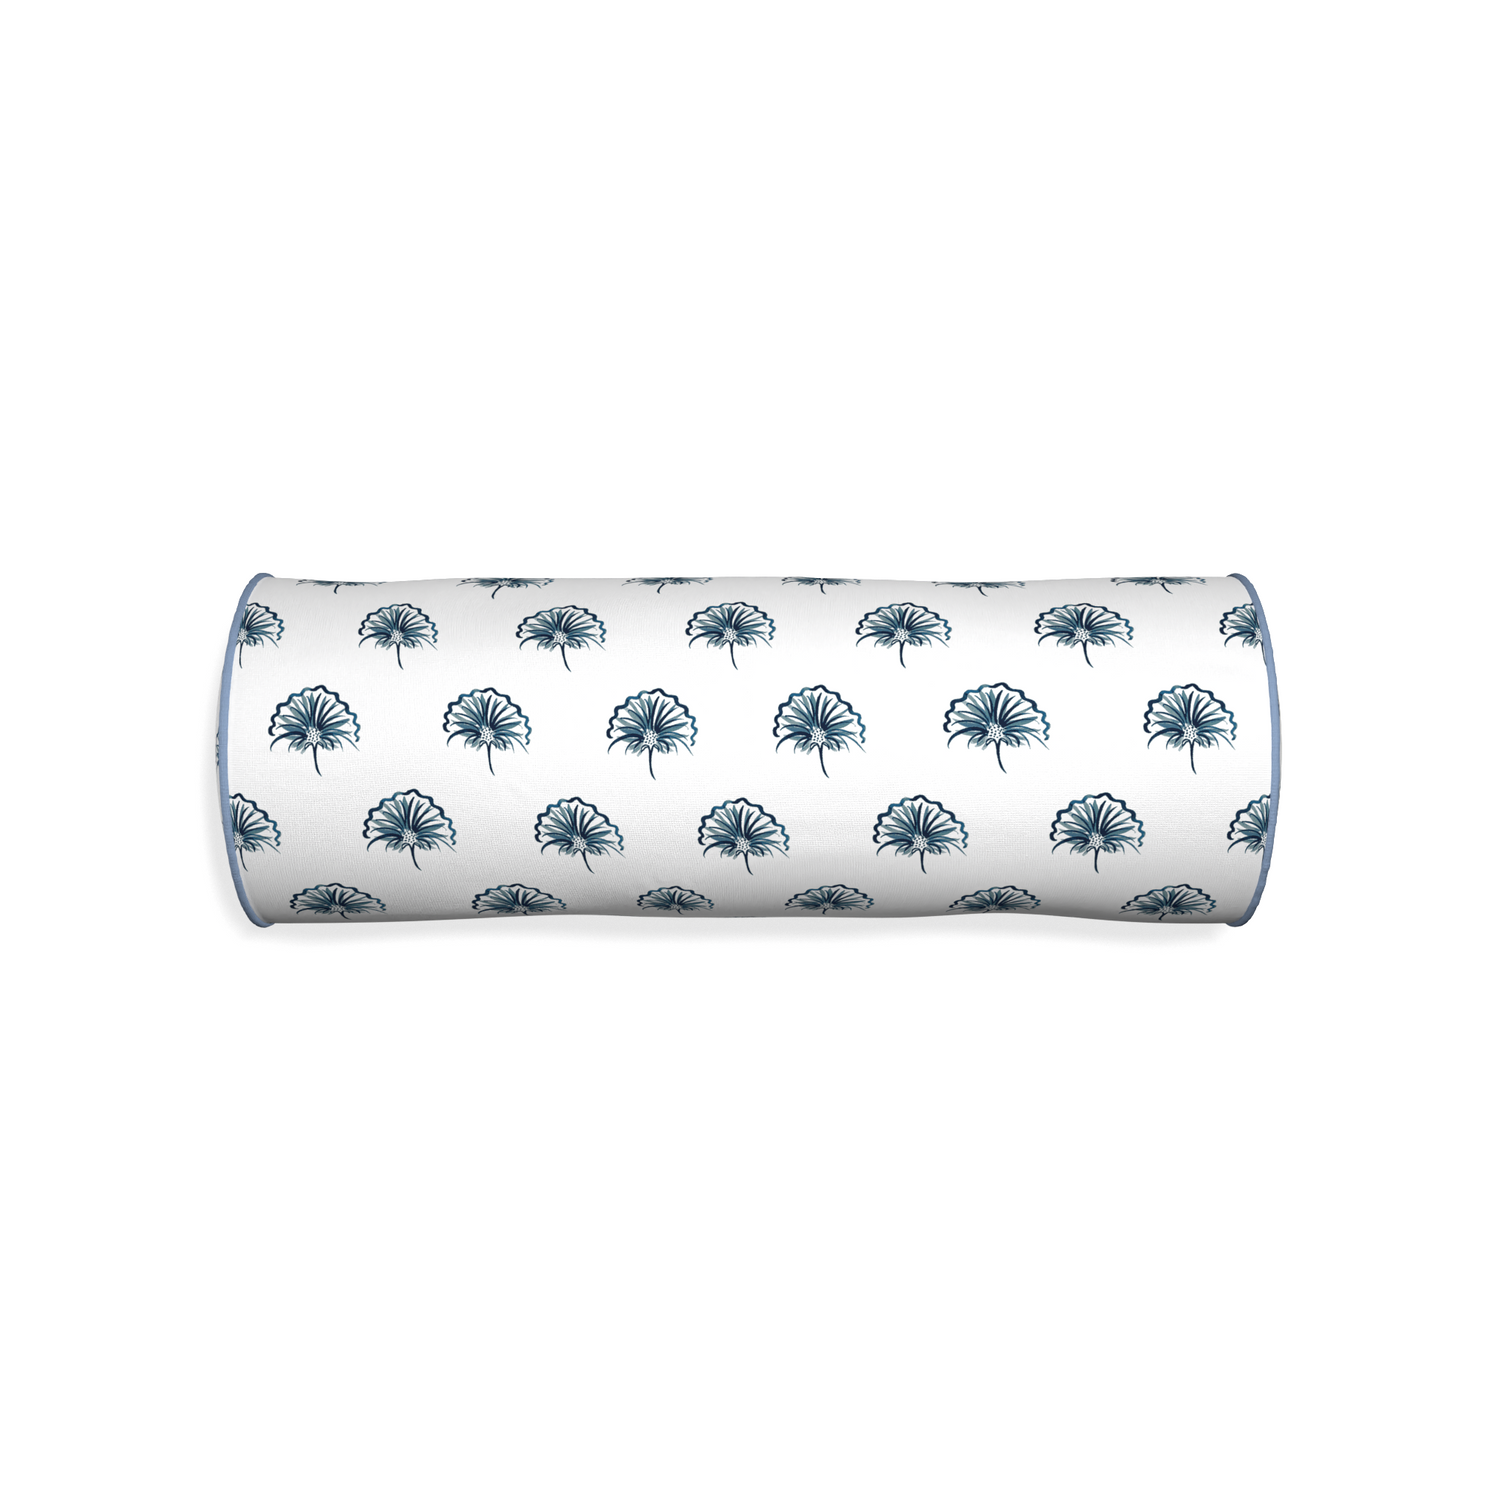 Bolster penelope midnight custom floral navypillow with sky piping on white background